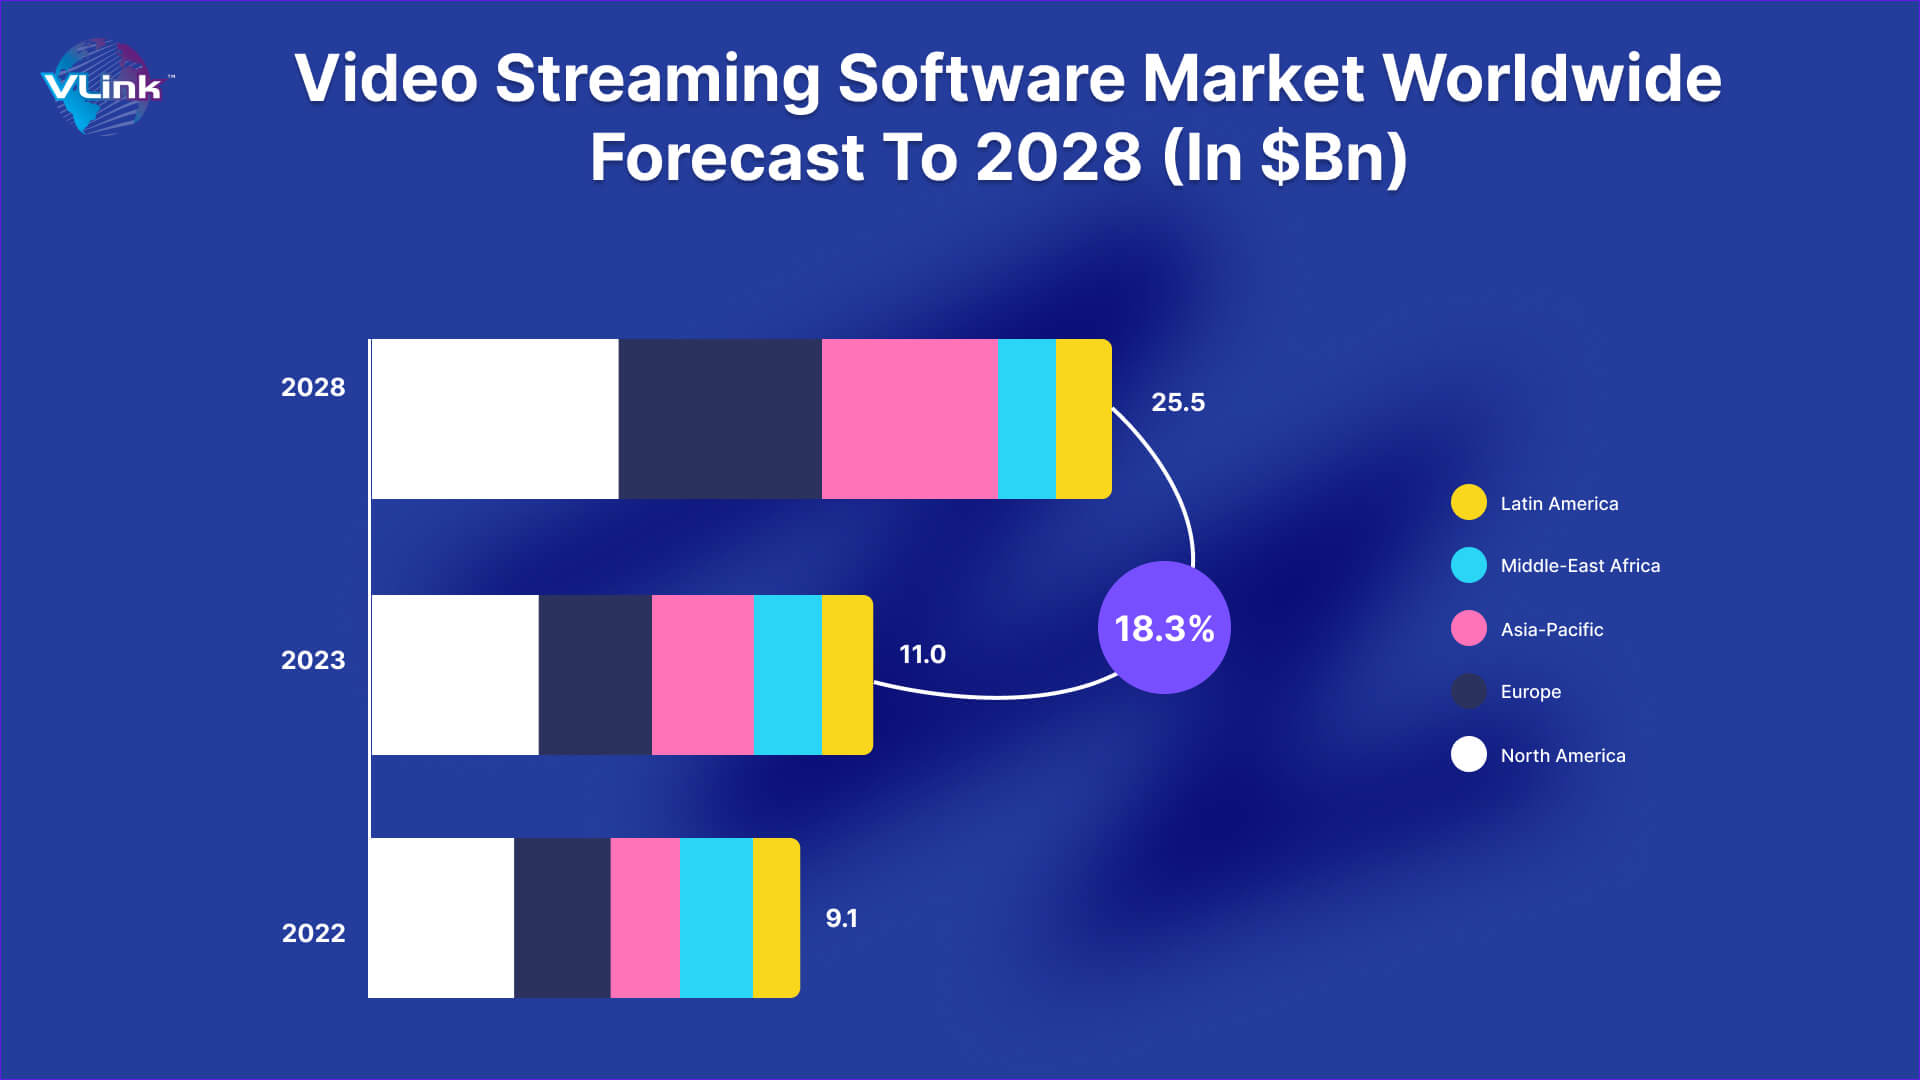 Global video streaming software market